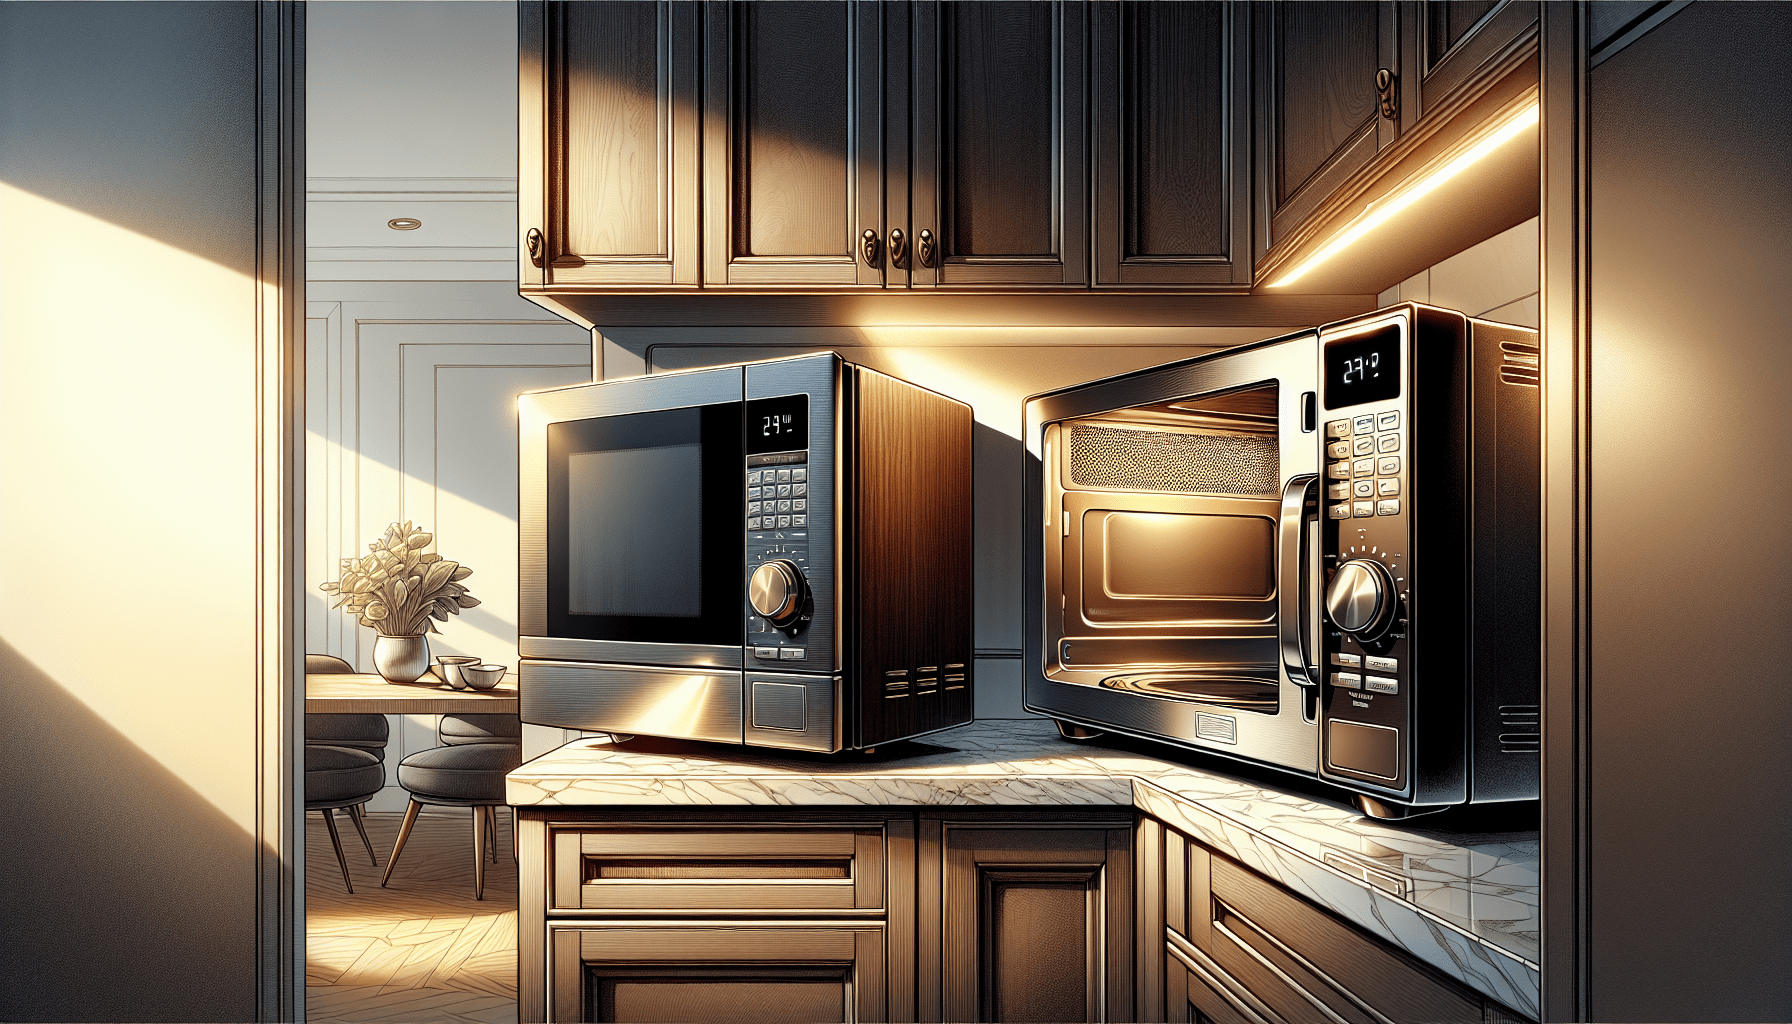 What Is The Difference Between A Countertop And Built In Microwave?